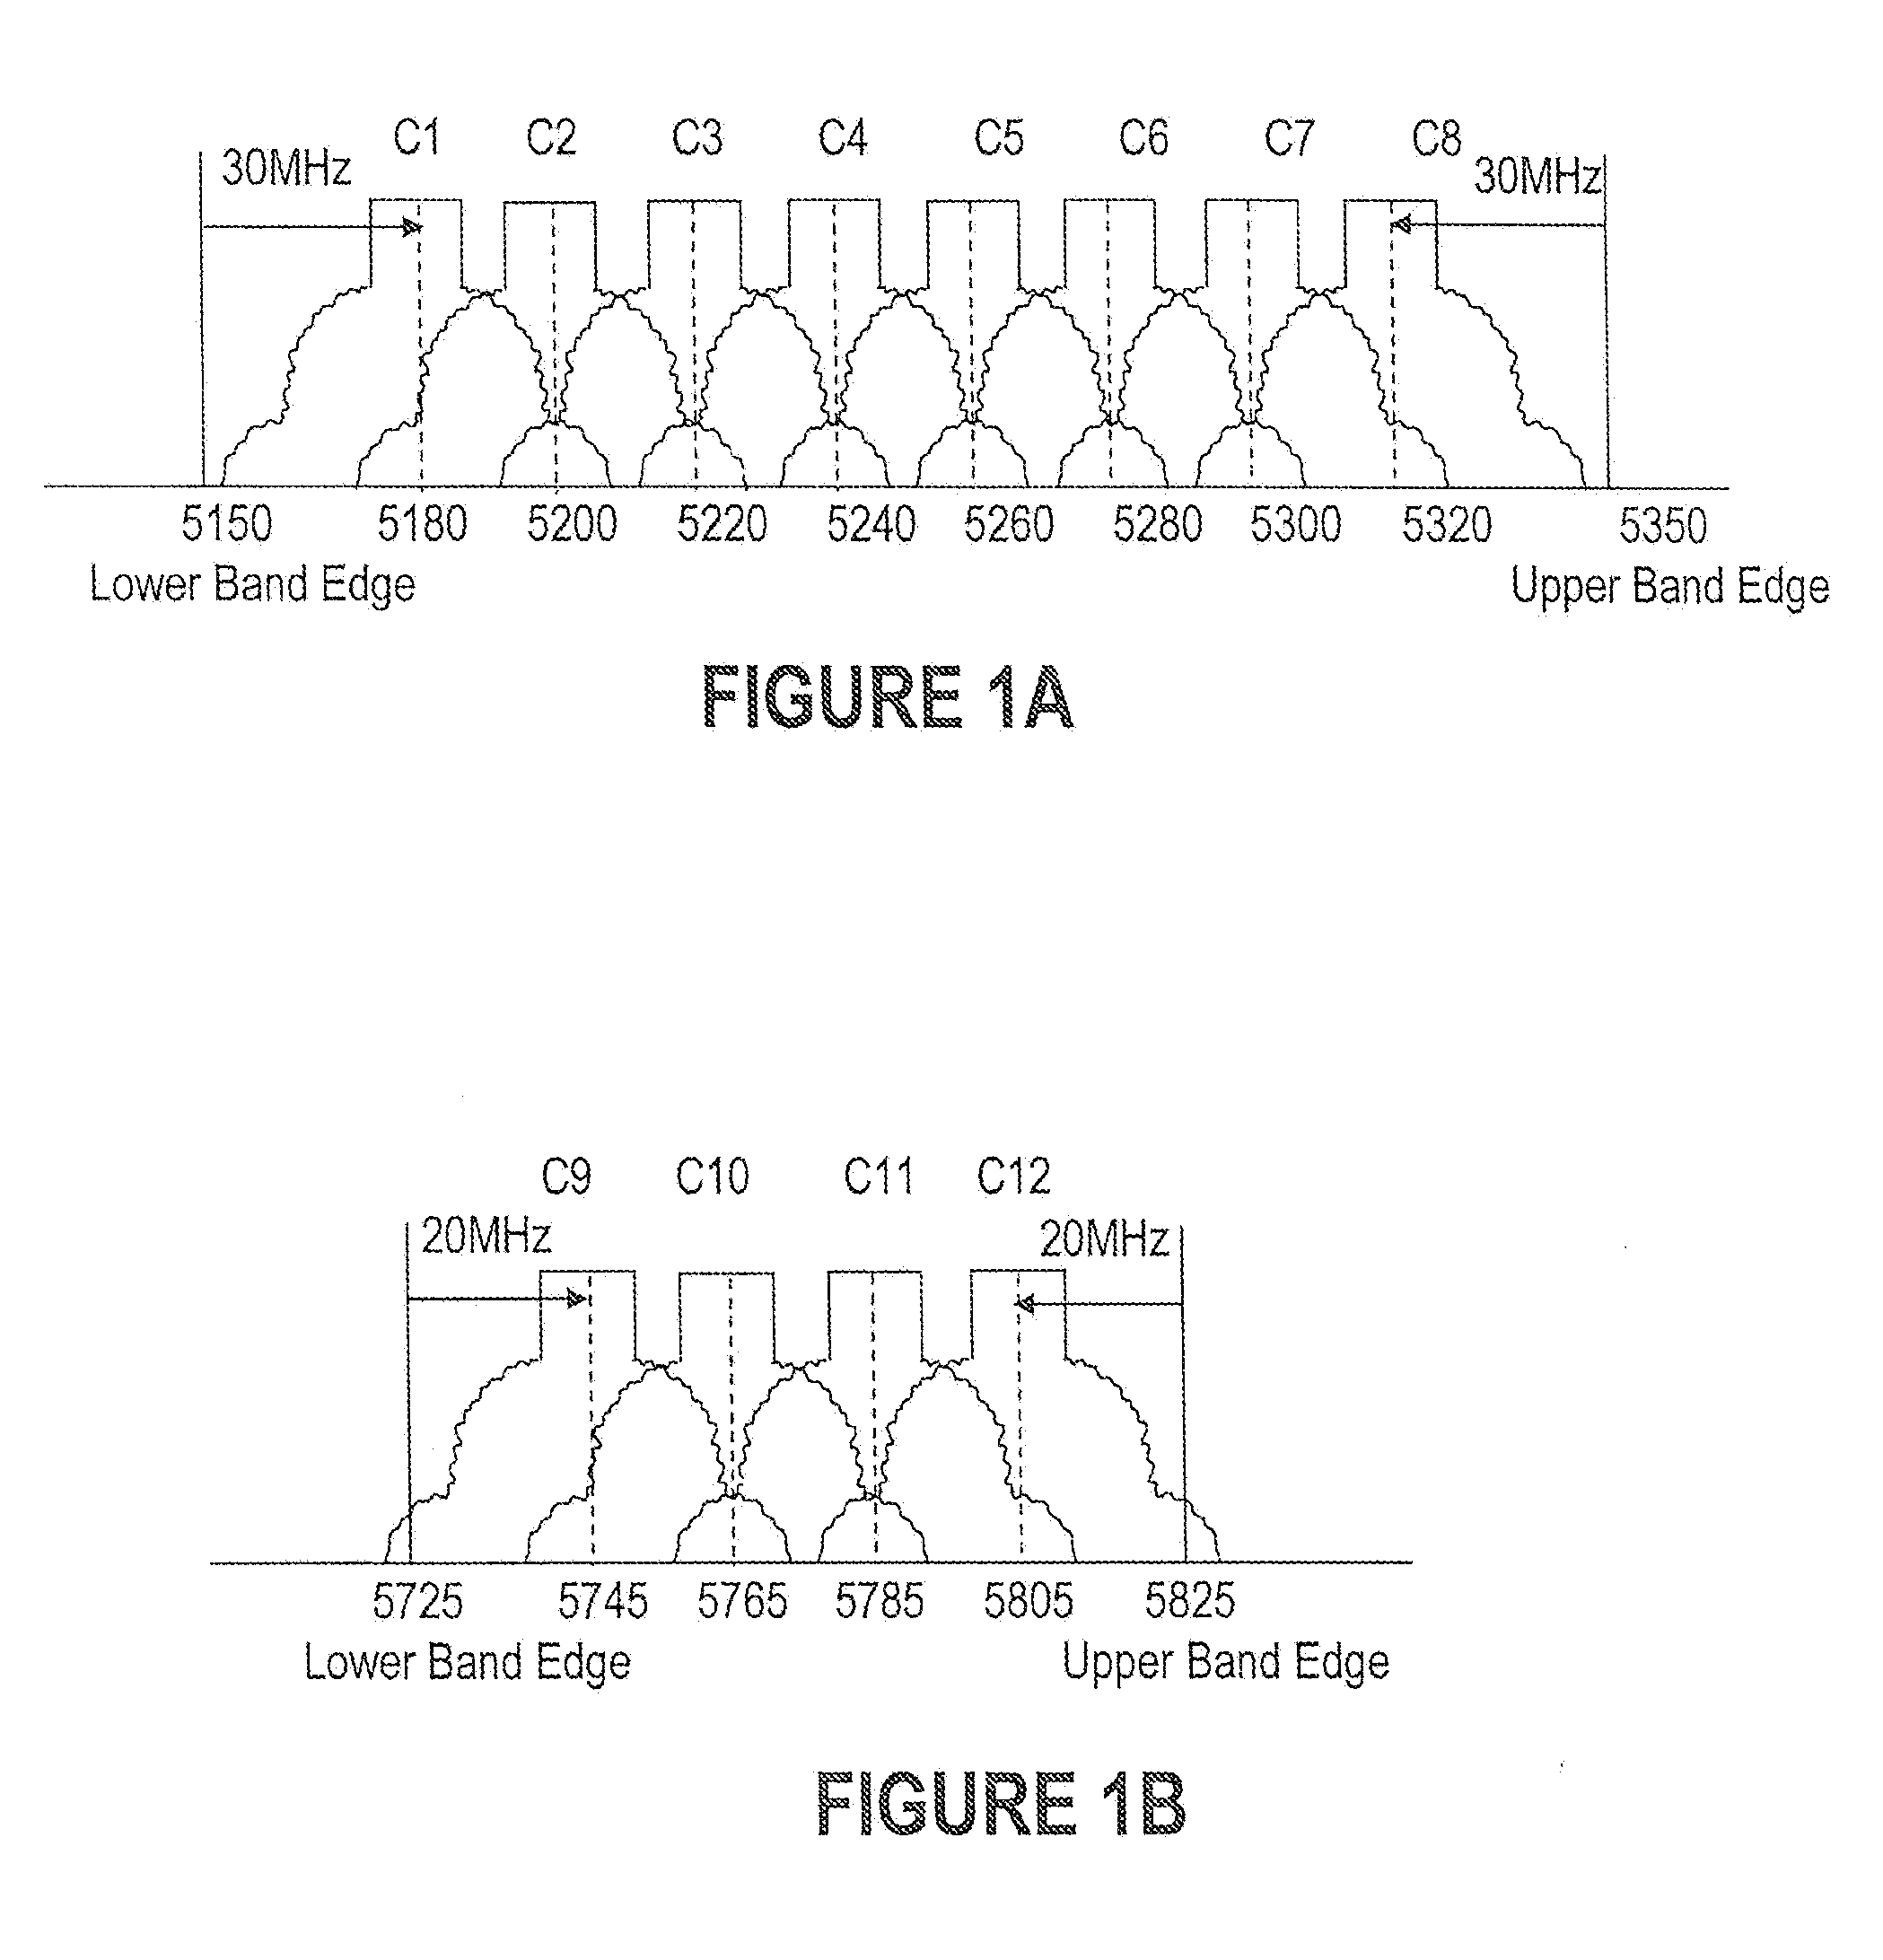 System and method for data distribution in vhf/uhf bands